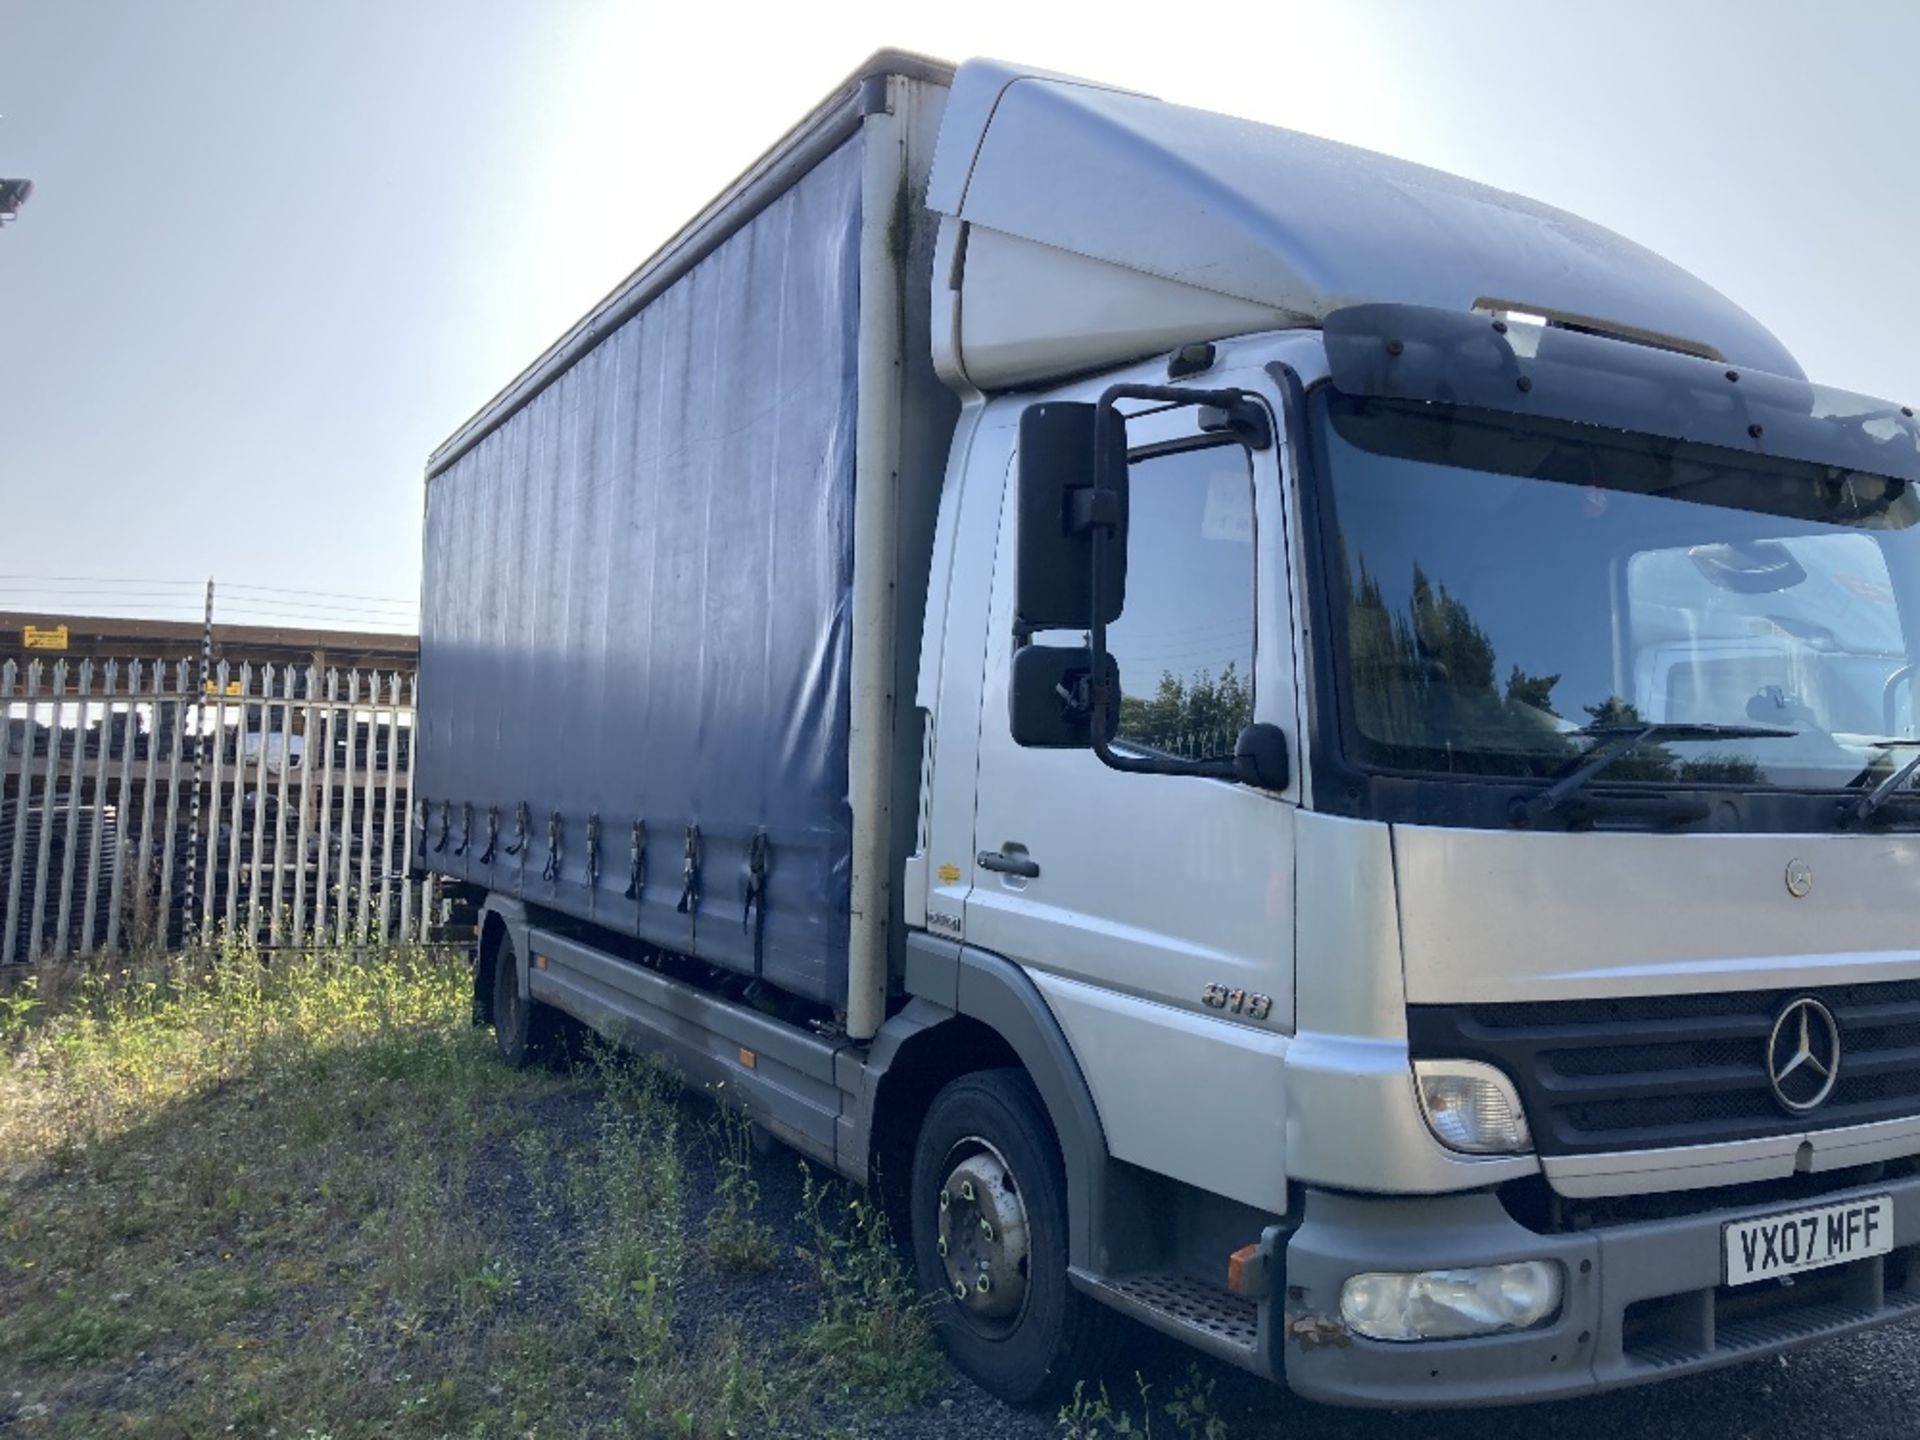 Mercedes Atego 818 Blue Tec 4 7.5T Curtain Sider HGV (VX07MFF) - Image 3 of 18